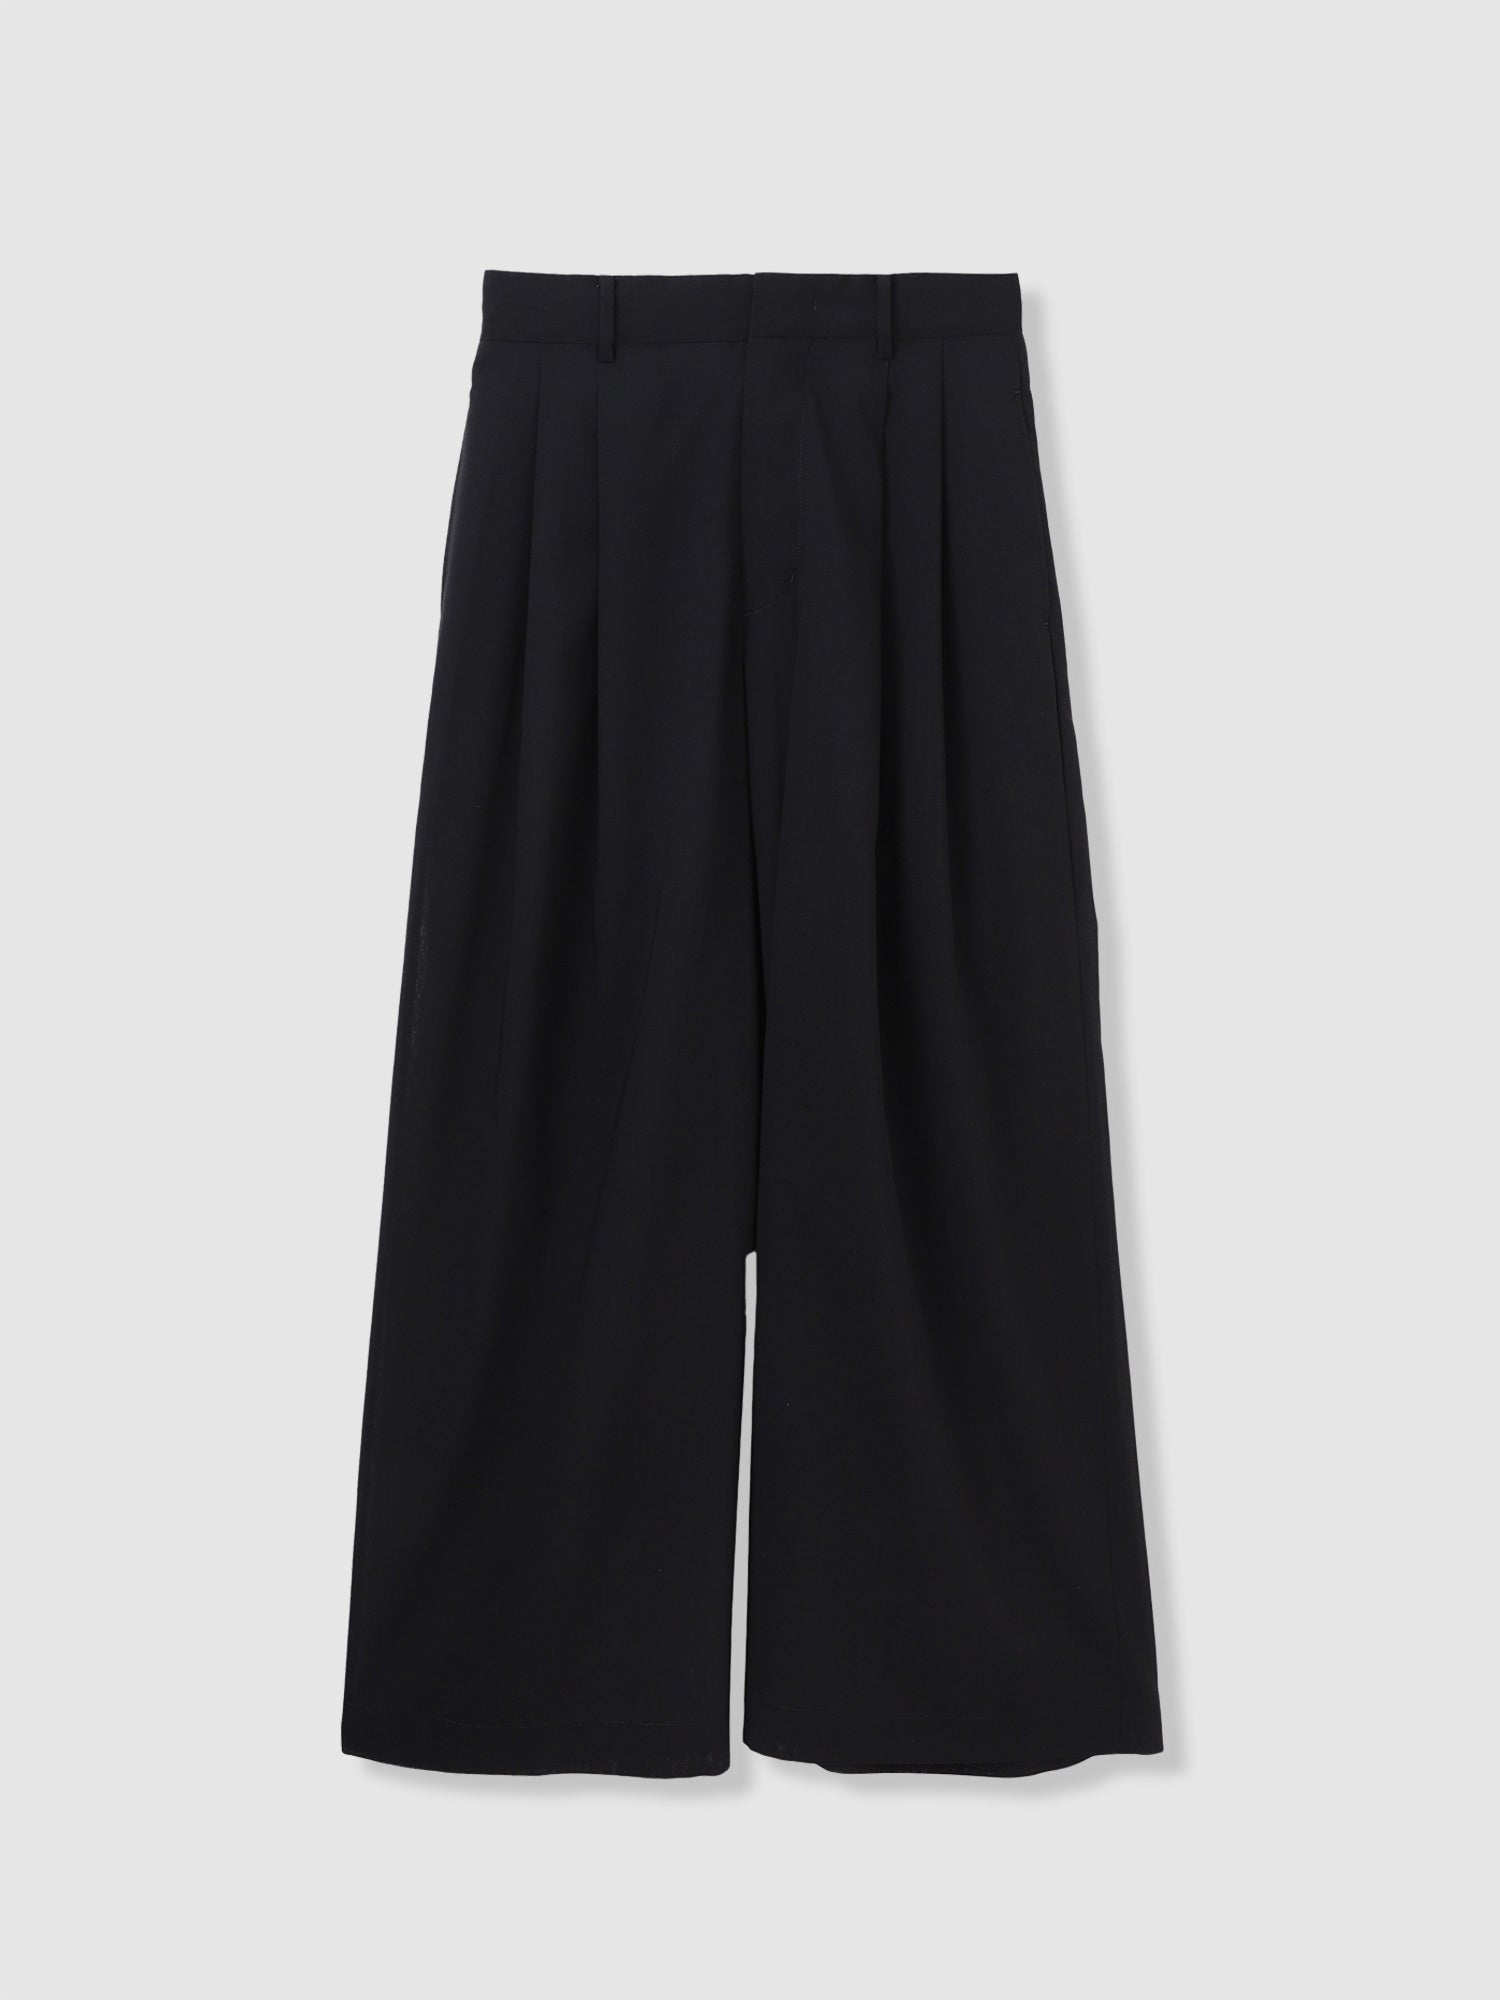 Voile Sheer Tuck Pants<BR>新着アイテム|春夏シーズン